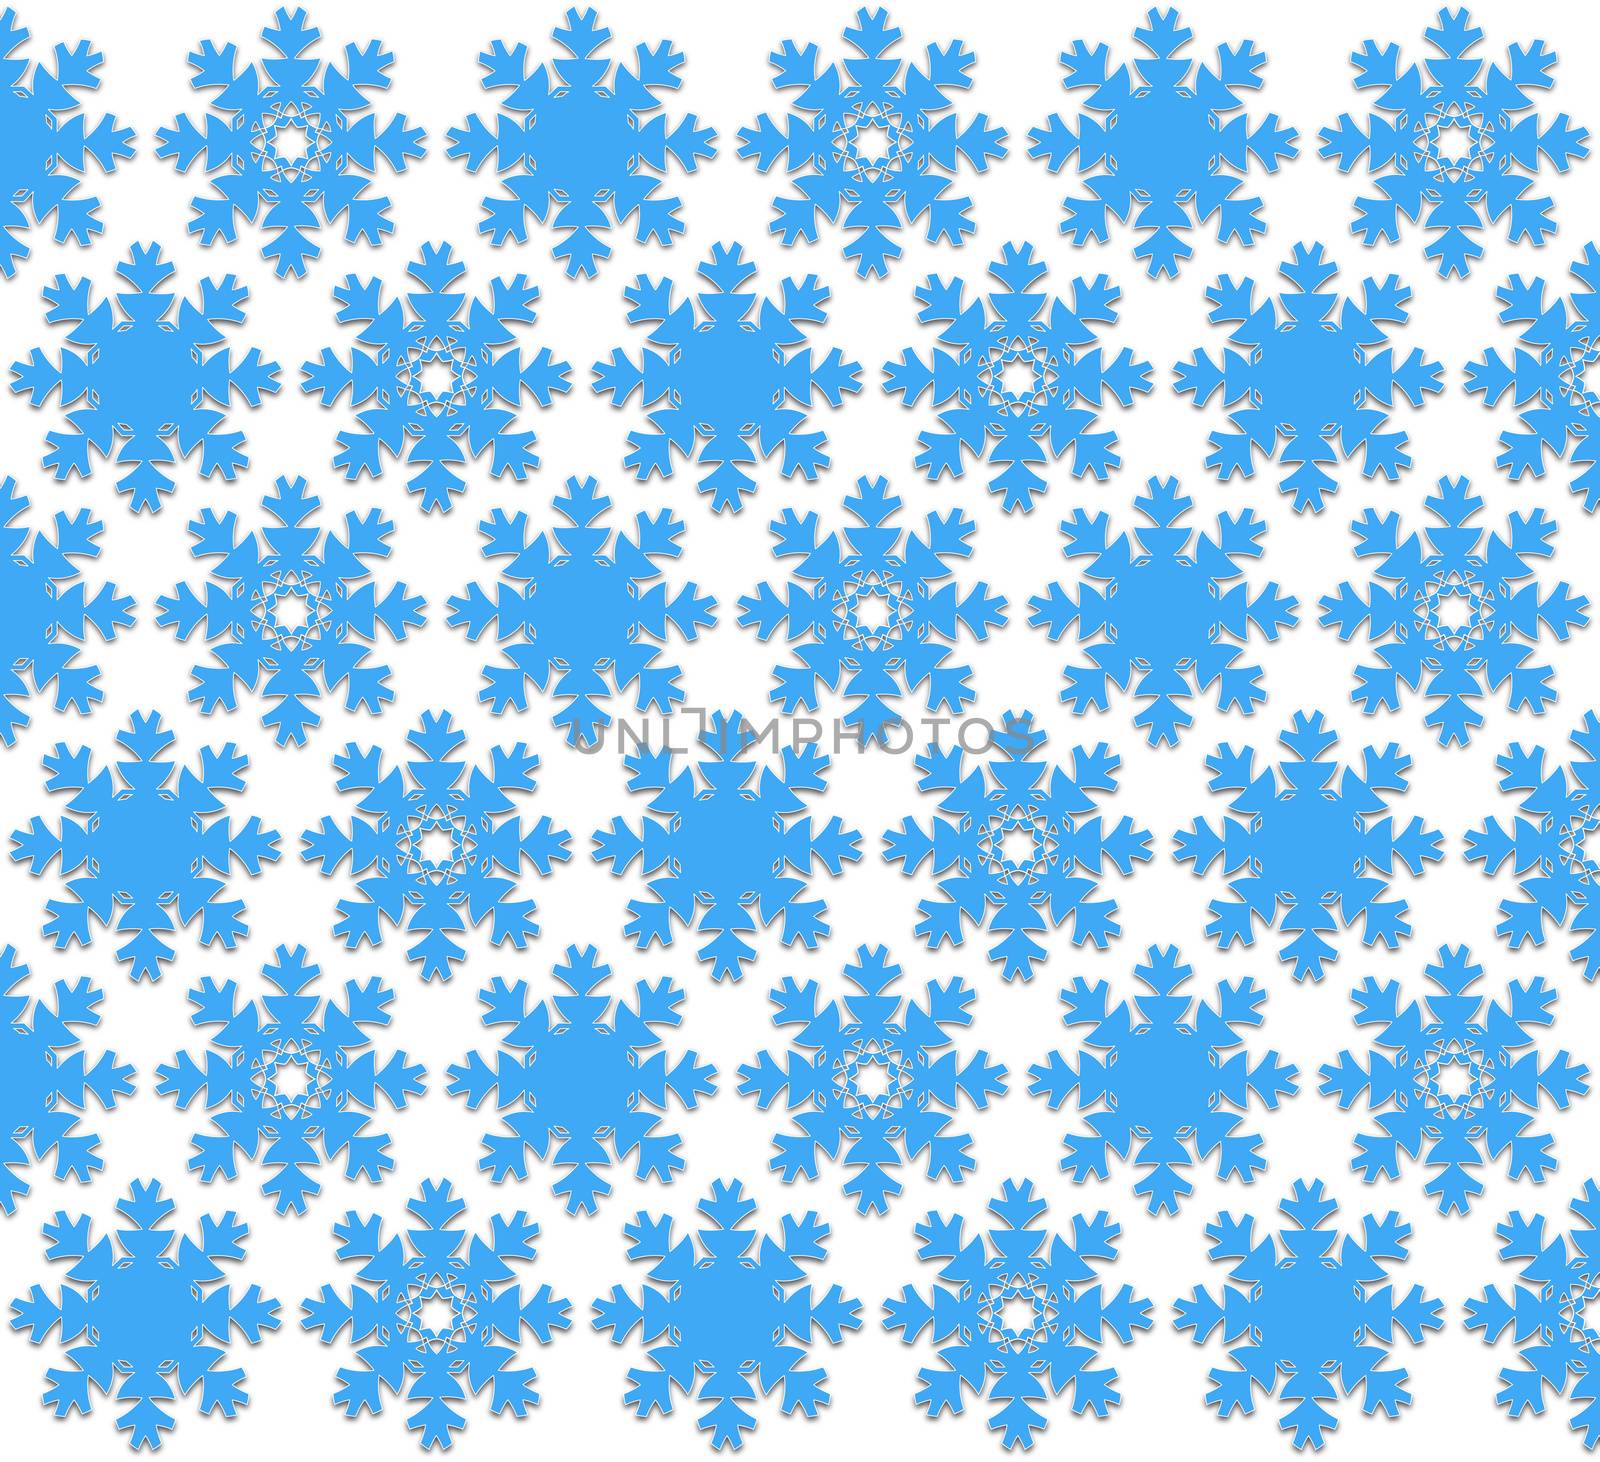 background or textile pattern blue snowflakes